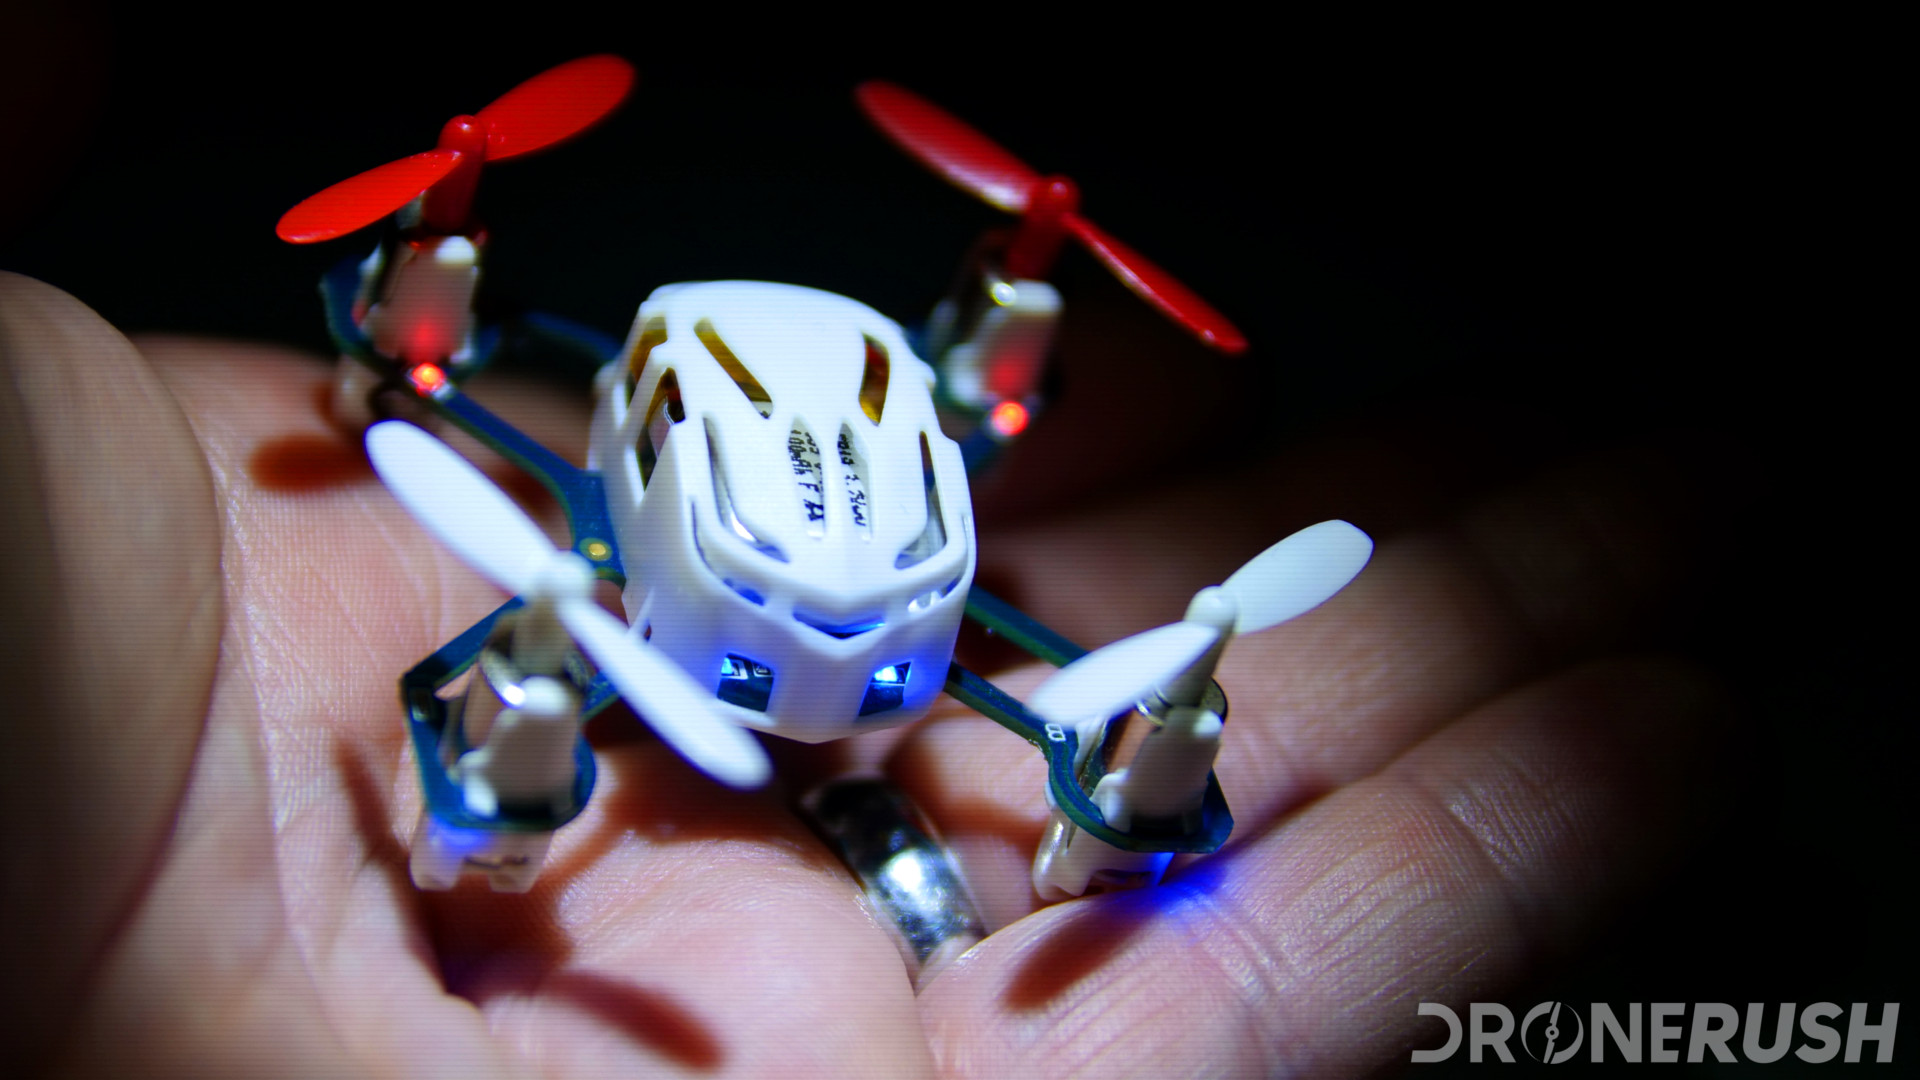 world's smallest drone with camera best drones 2018